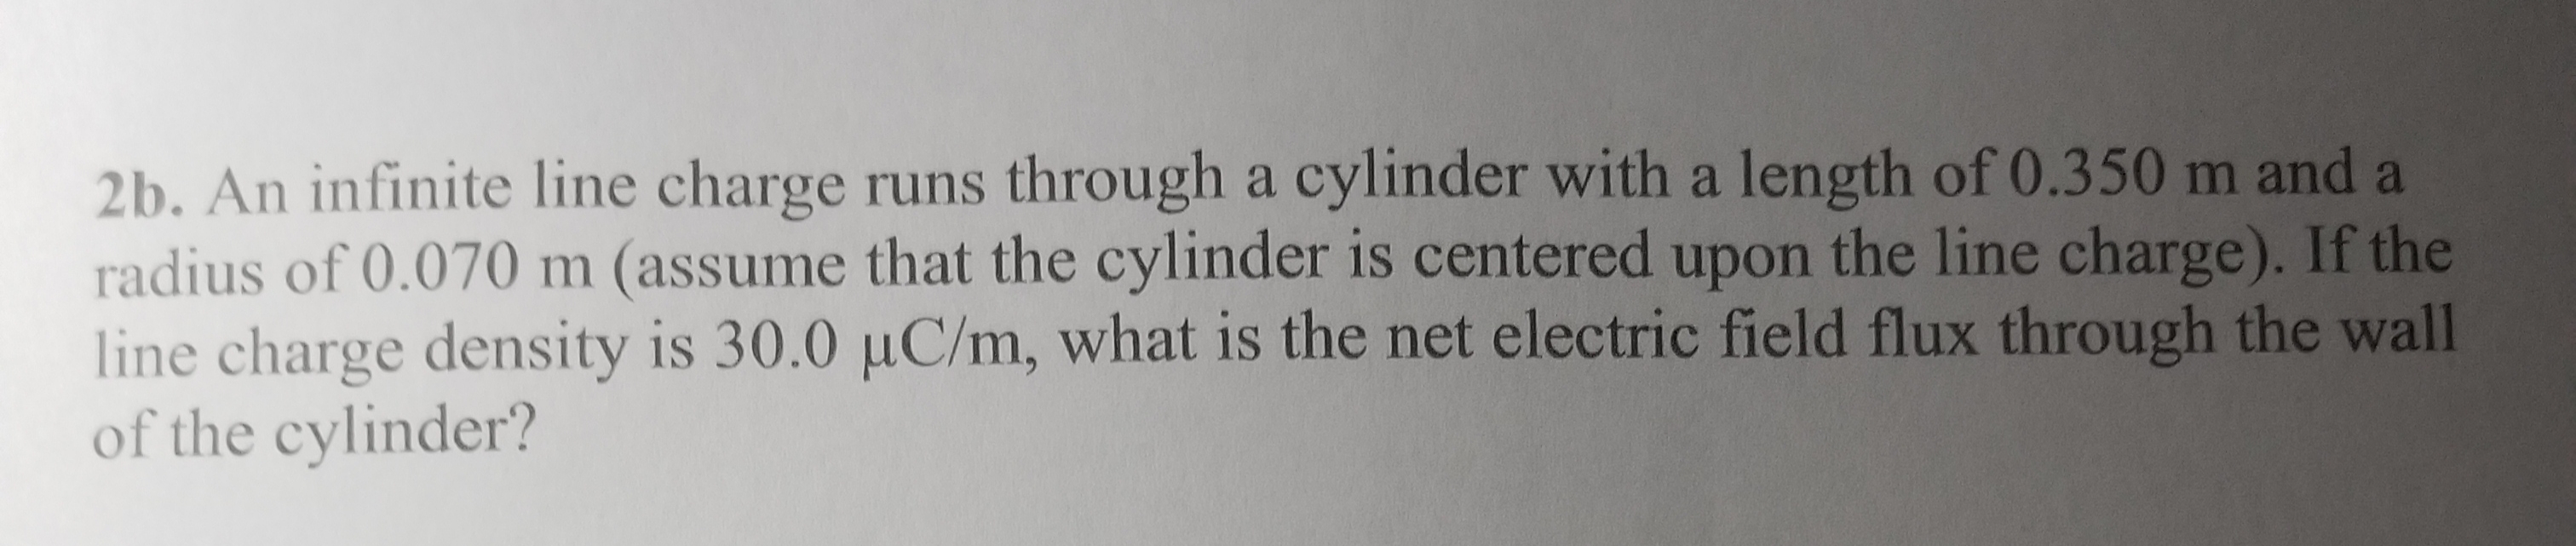 line charge density is 30.0 µC/m, what is the net electric field flux through the wall
of the cylinder?
